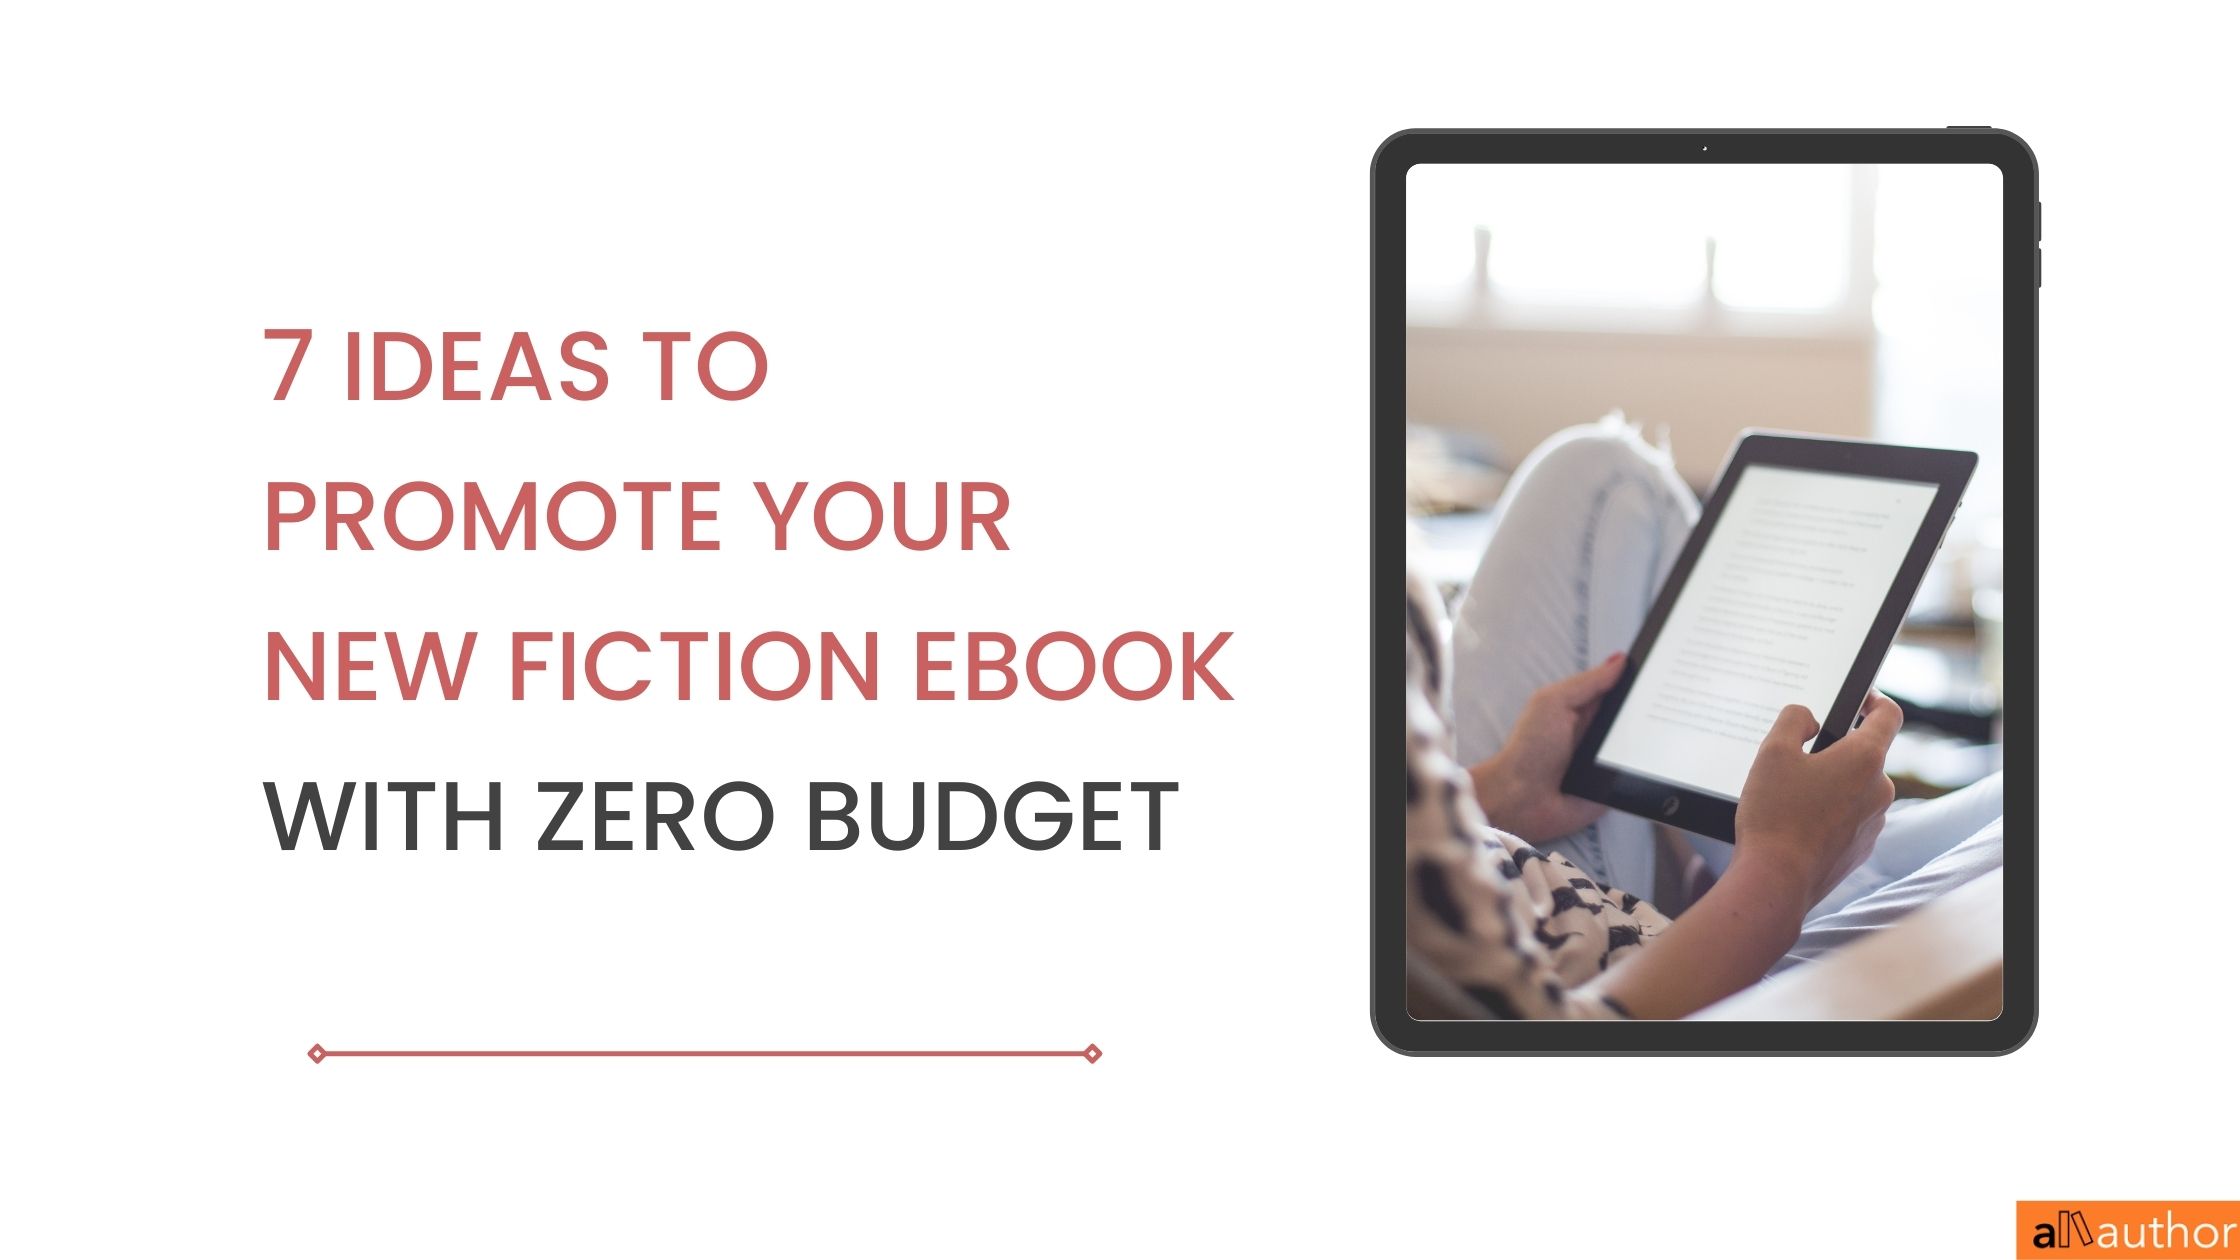 7 Ideas to Promote Your New Fiction eBook with Zero Budget